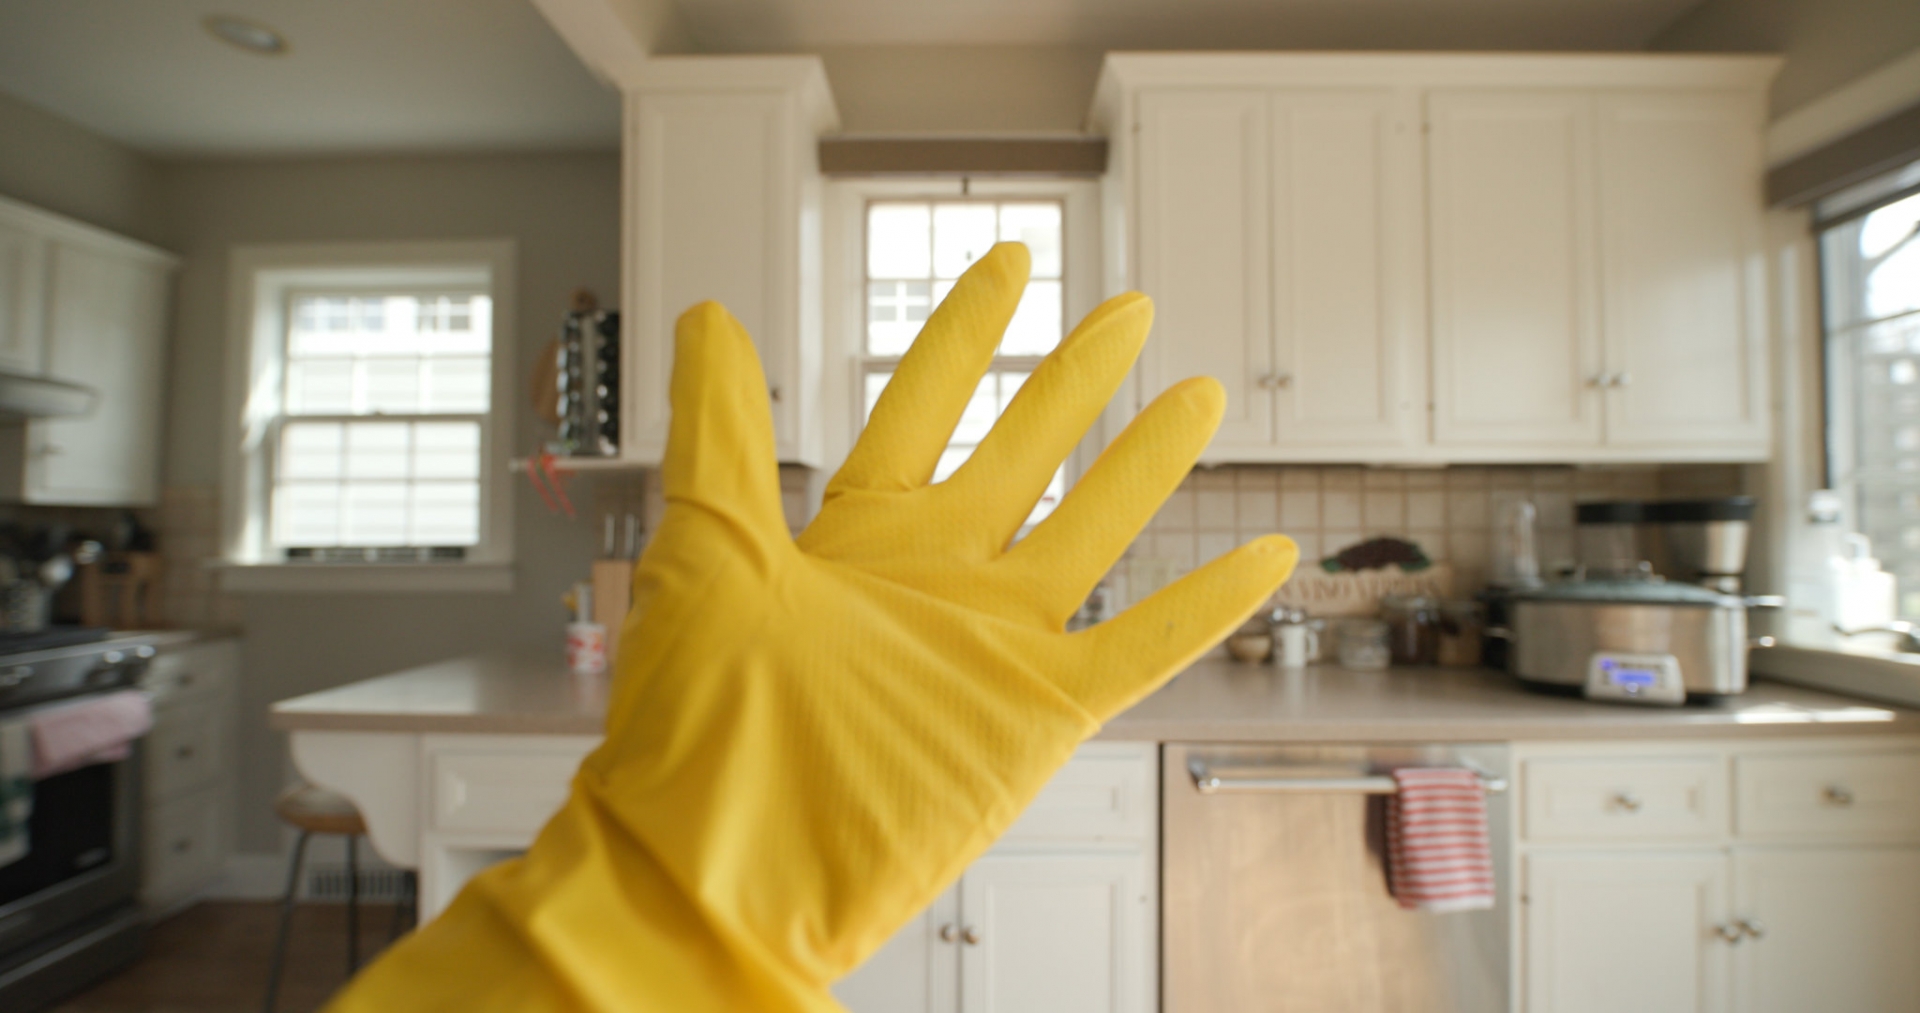 15 Fast and Ultimate Tips to Clean Your Whole House Effectively